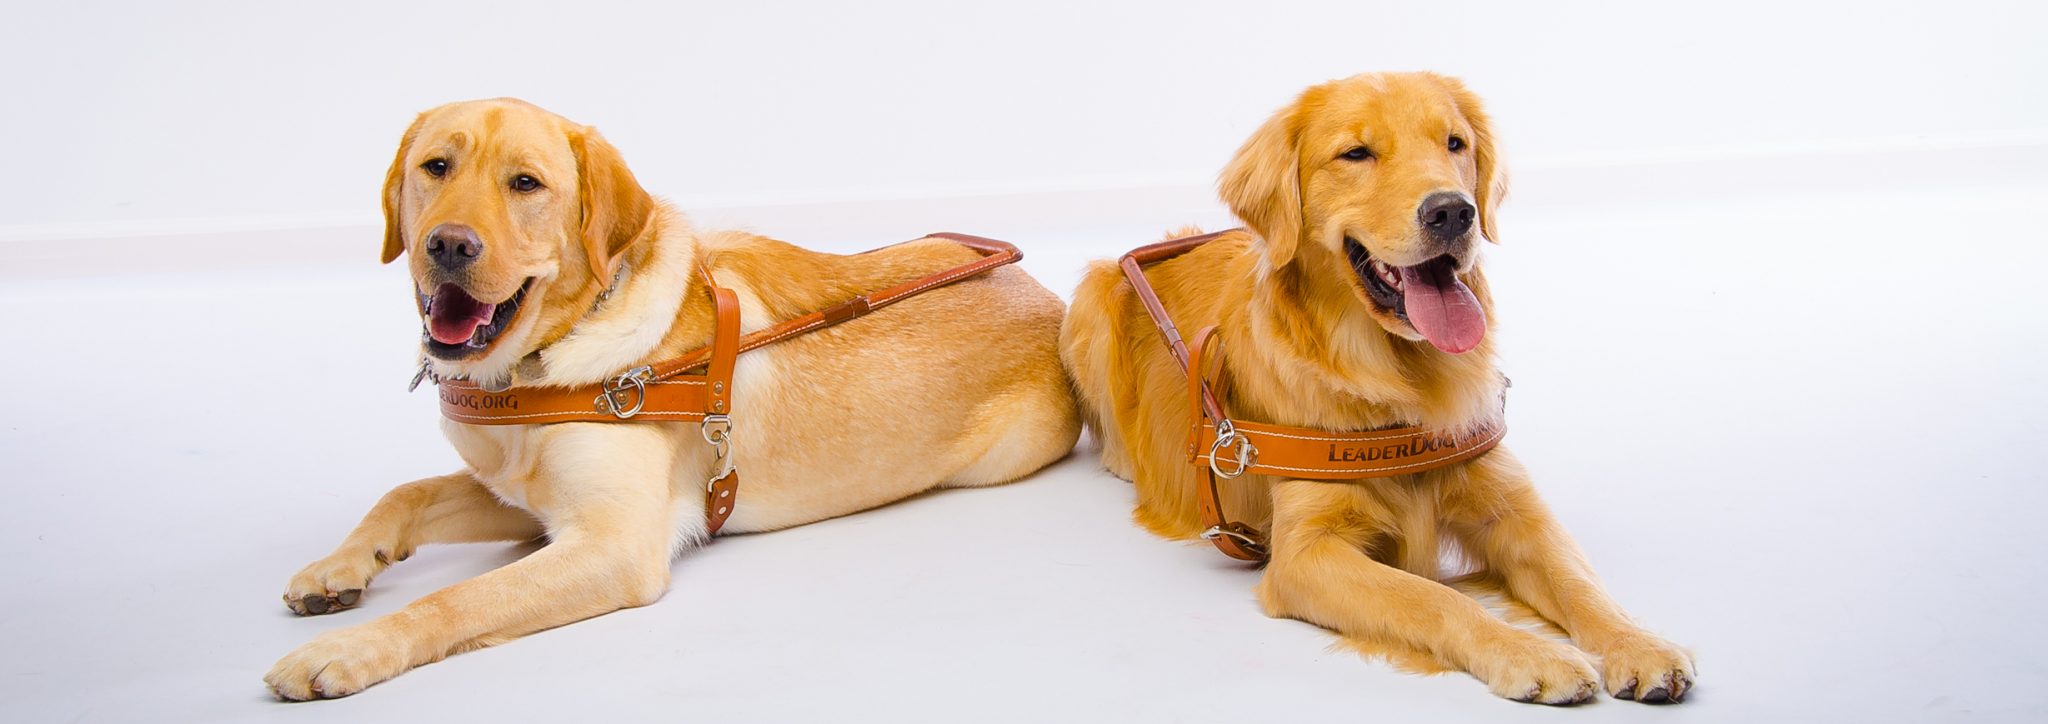 A yellow lab and a golden retriever lie down in front of a white background wearing their Leader Dog harnesses